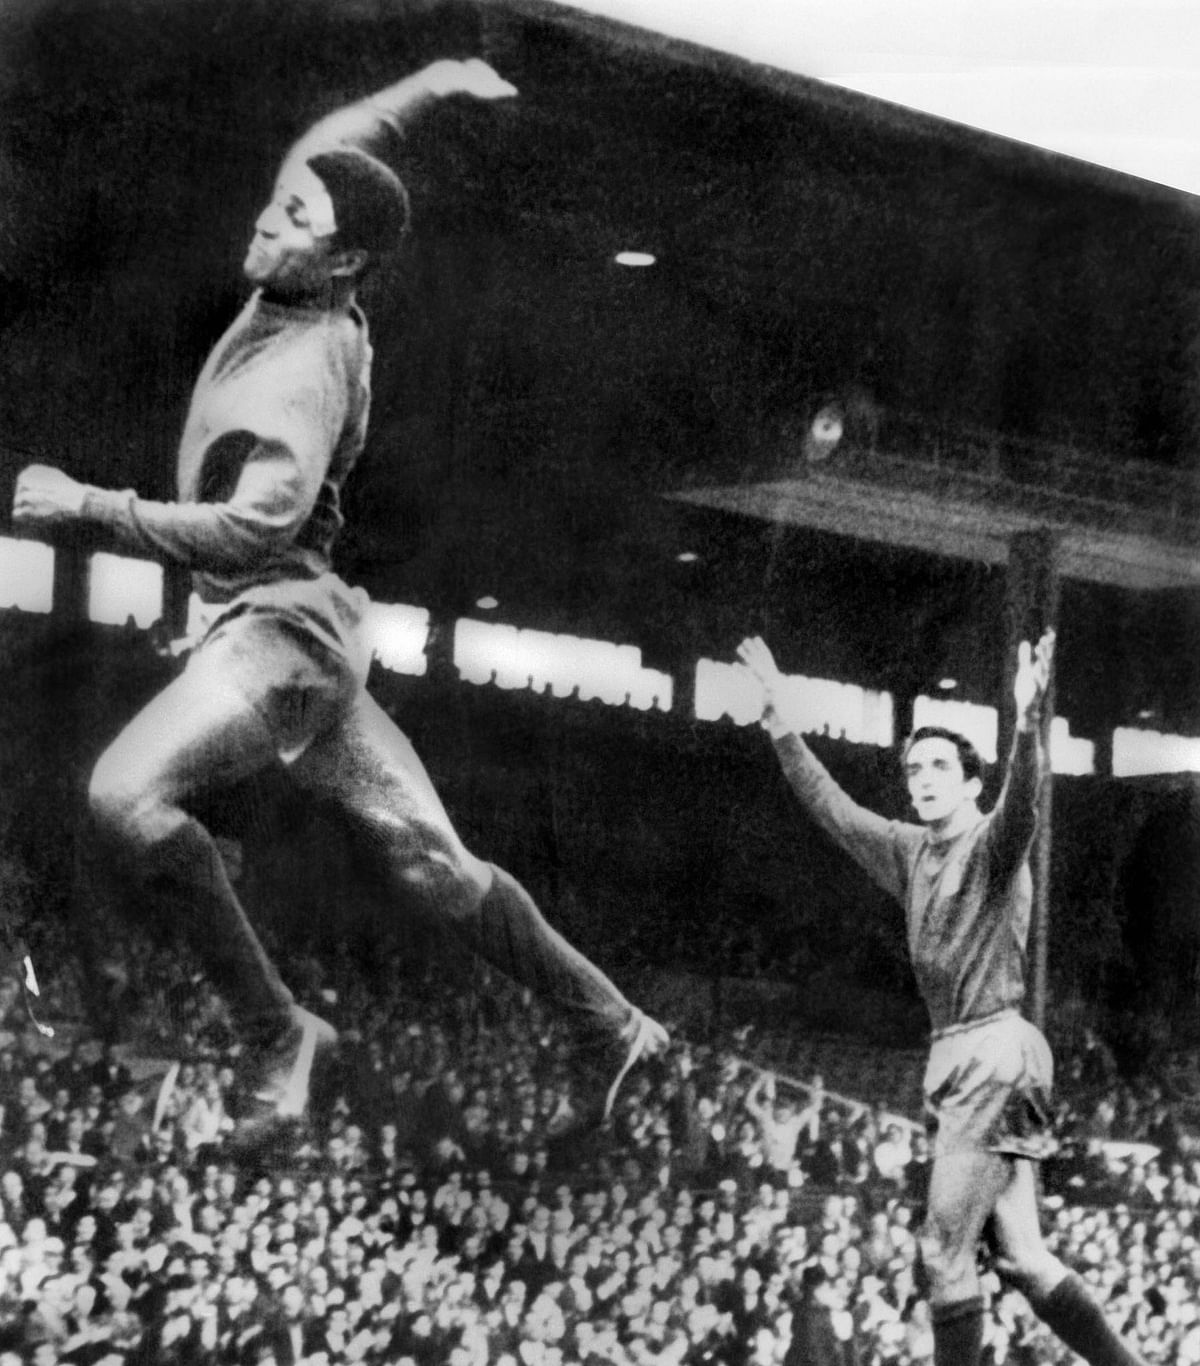 Portuguese forward Eusebio (L) celebrates after scoring a goal during the World Cup first round soccer match against Bulgaria on 17 July 1966 in Manchester. Portugal won 3-0. Photo: AFP